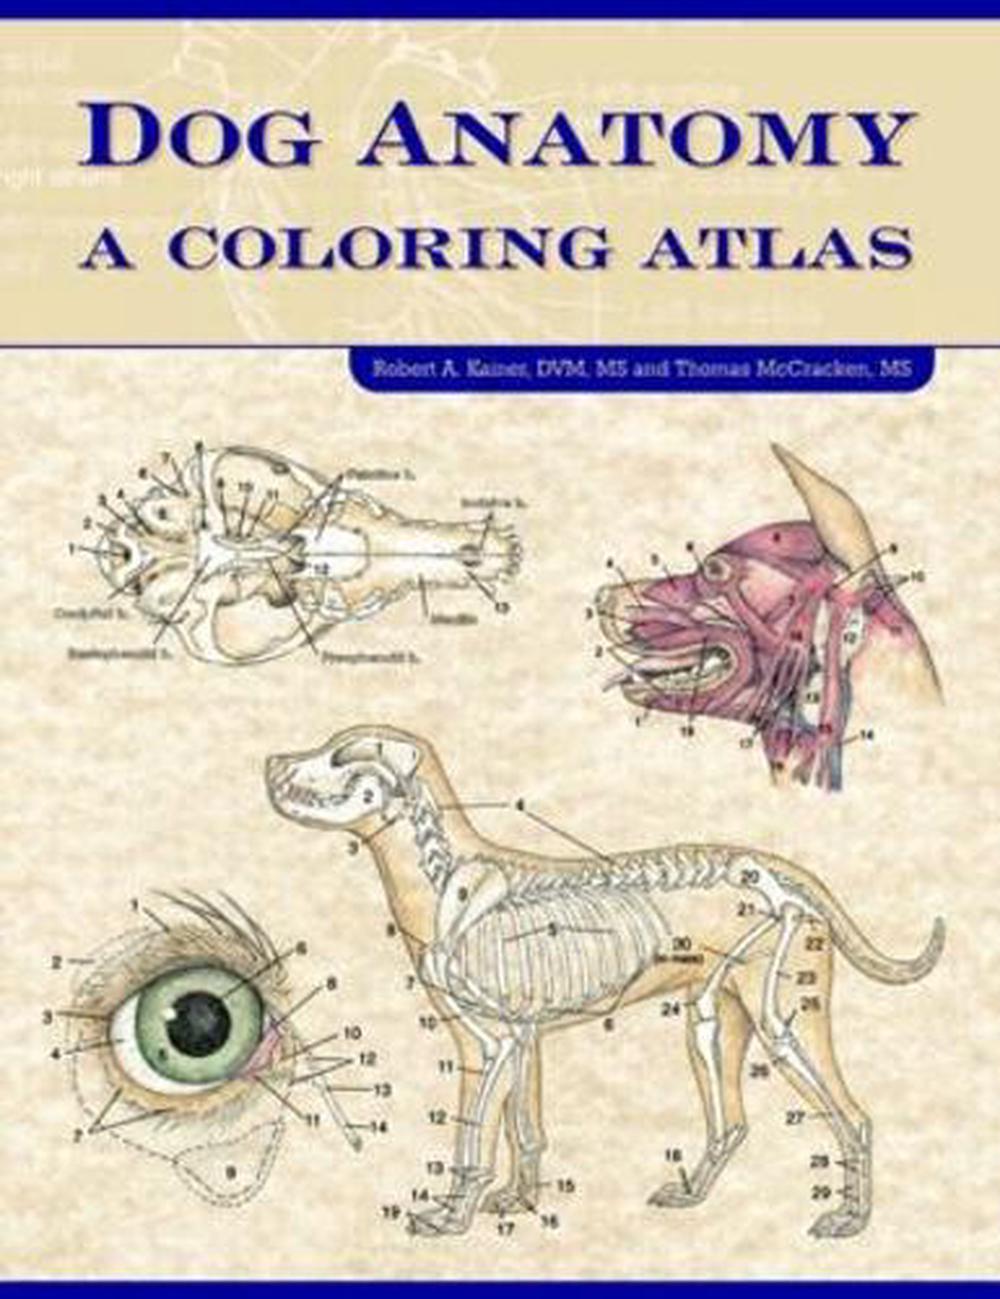 Dog Anatomy: A Coloring Atlas by Robert A. Kainer, Spiral, 9781893441170 |  Buy online at The Nile